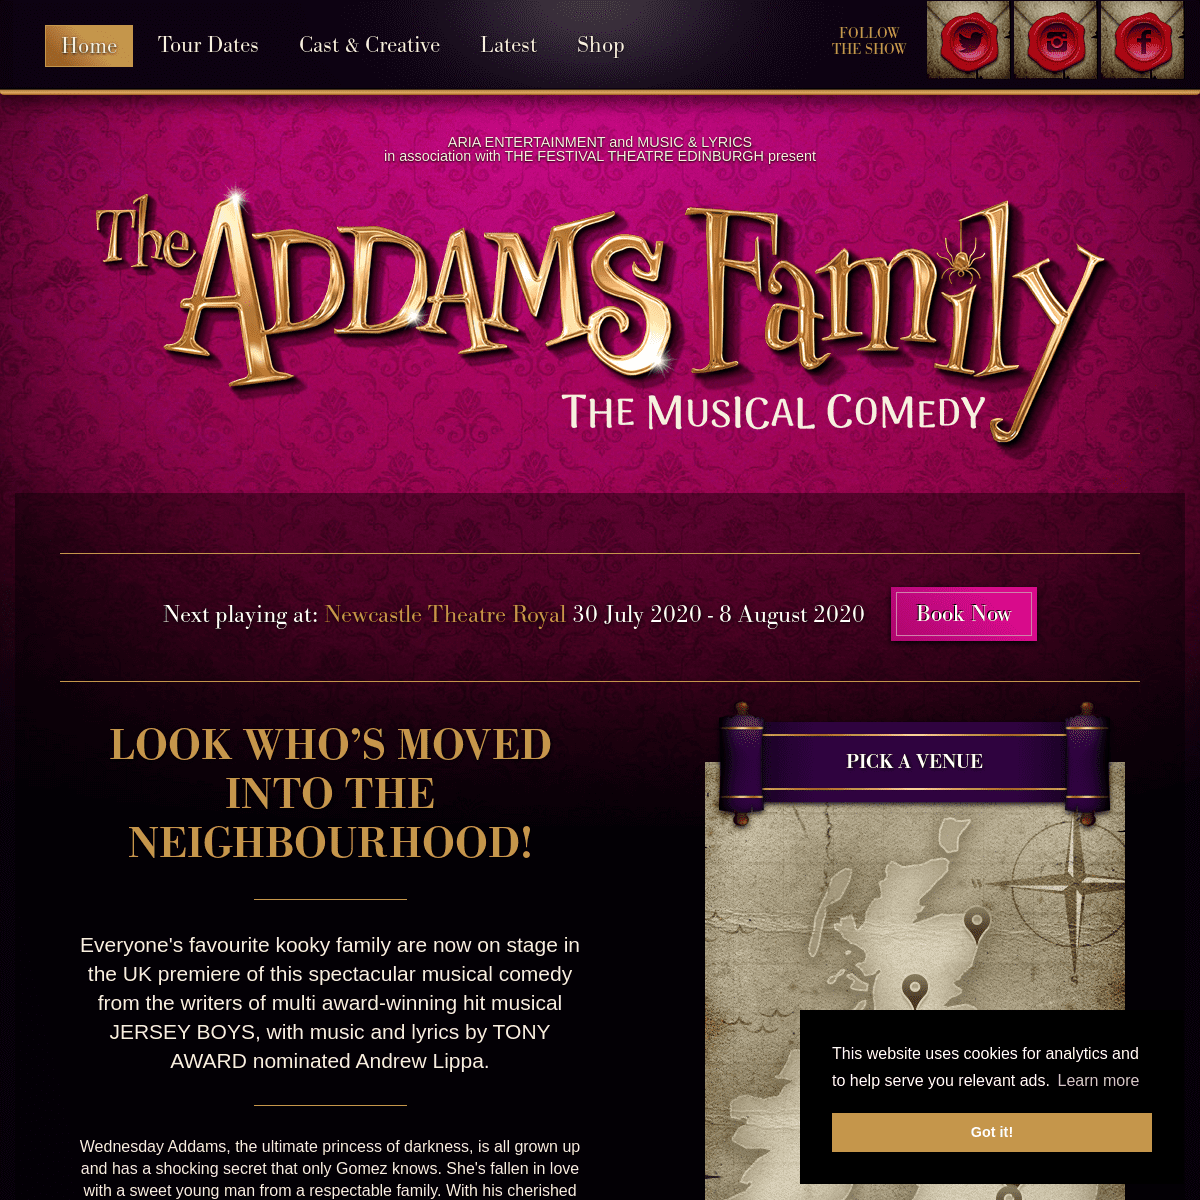 A complete backup of theaddamsfamily.co.uk